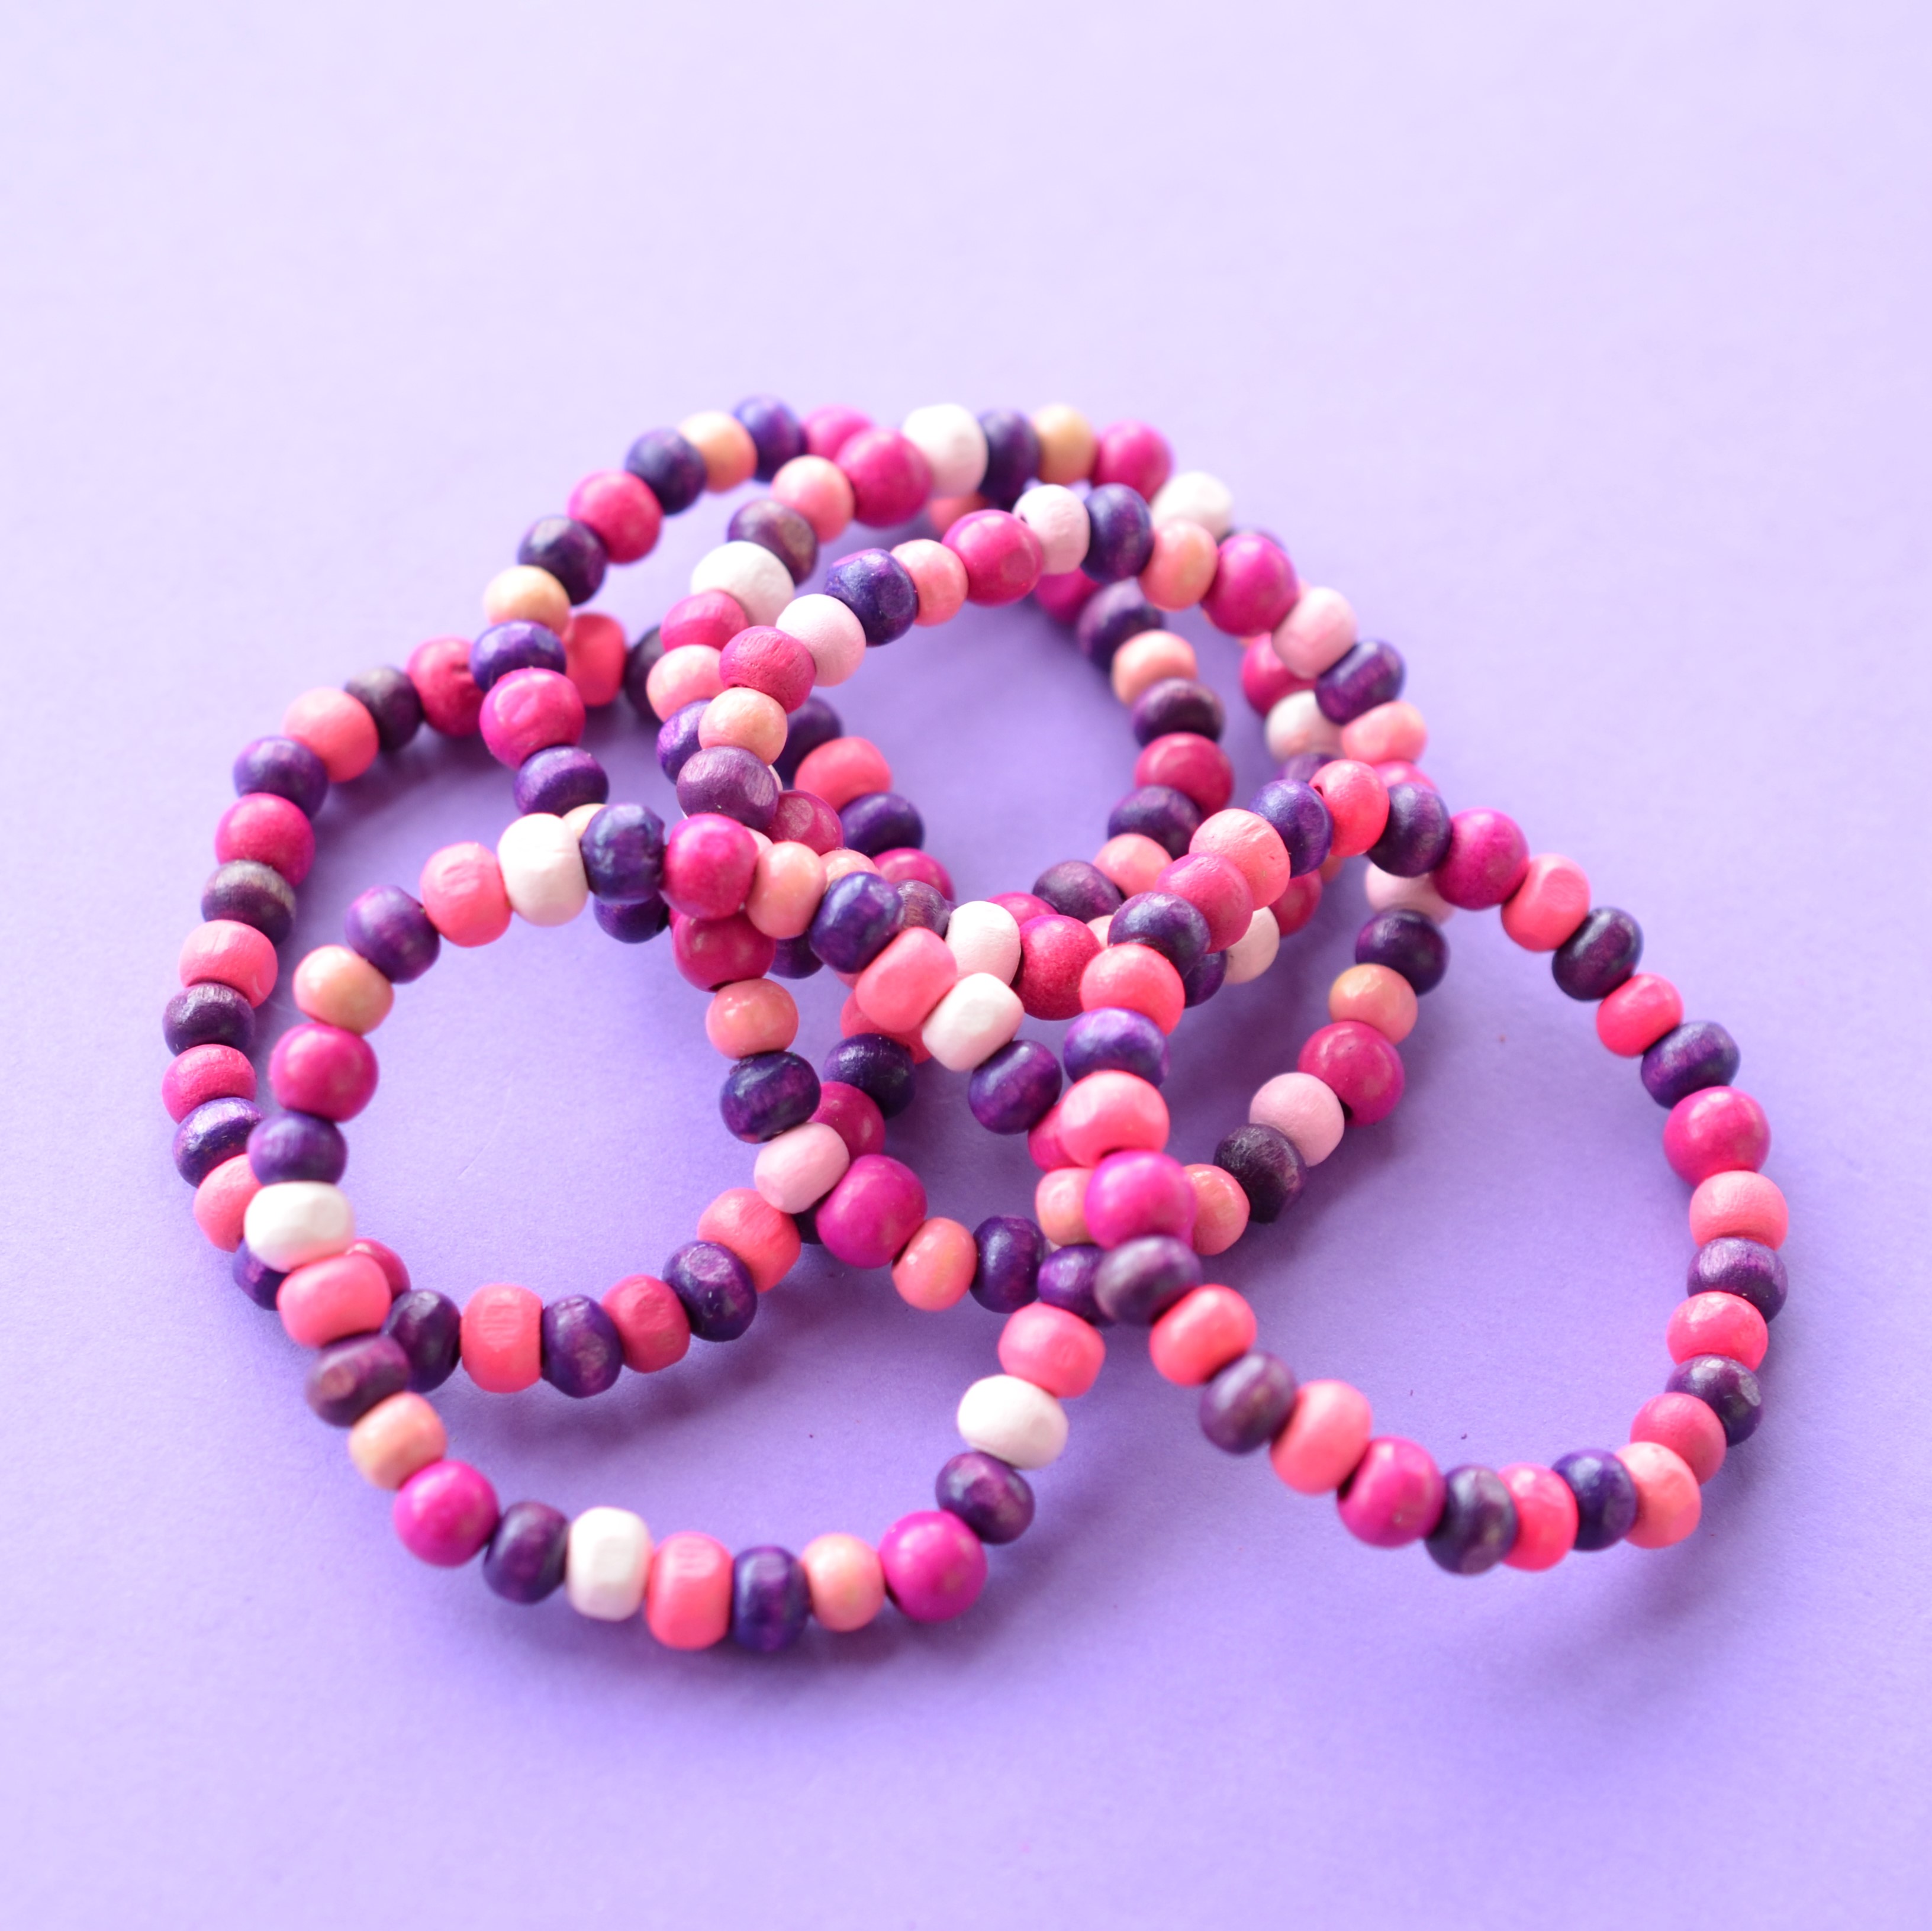 Book Colourful Child's Wooden Bead Charm Bracelet Reading